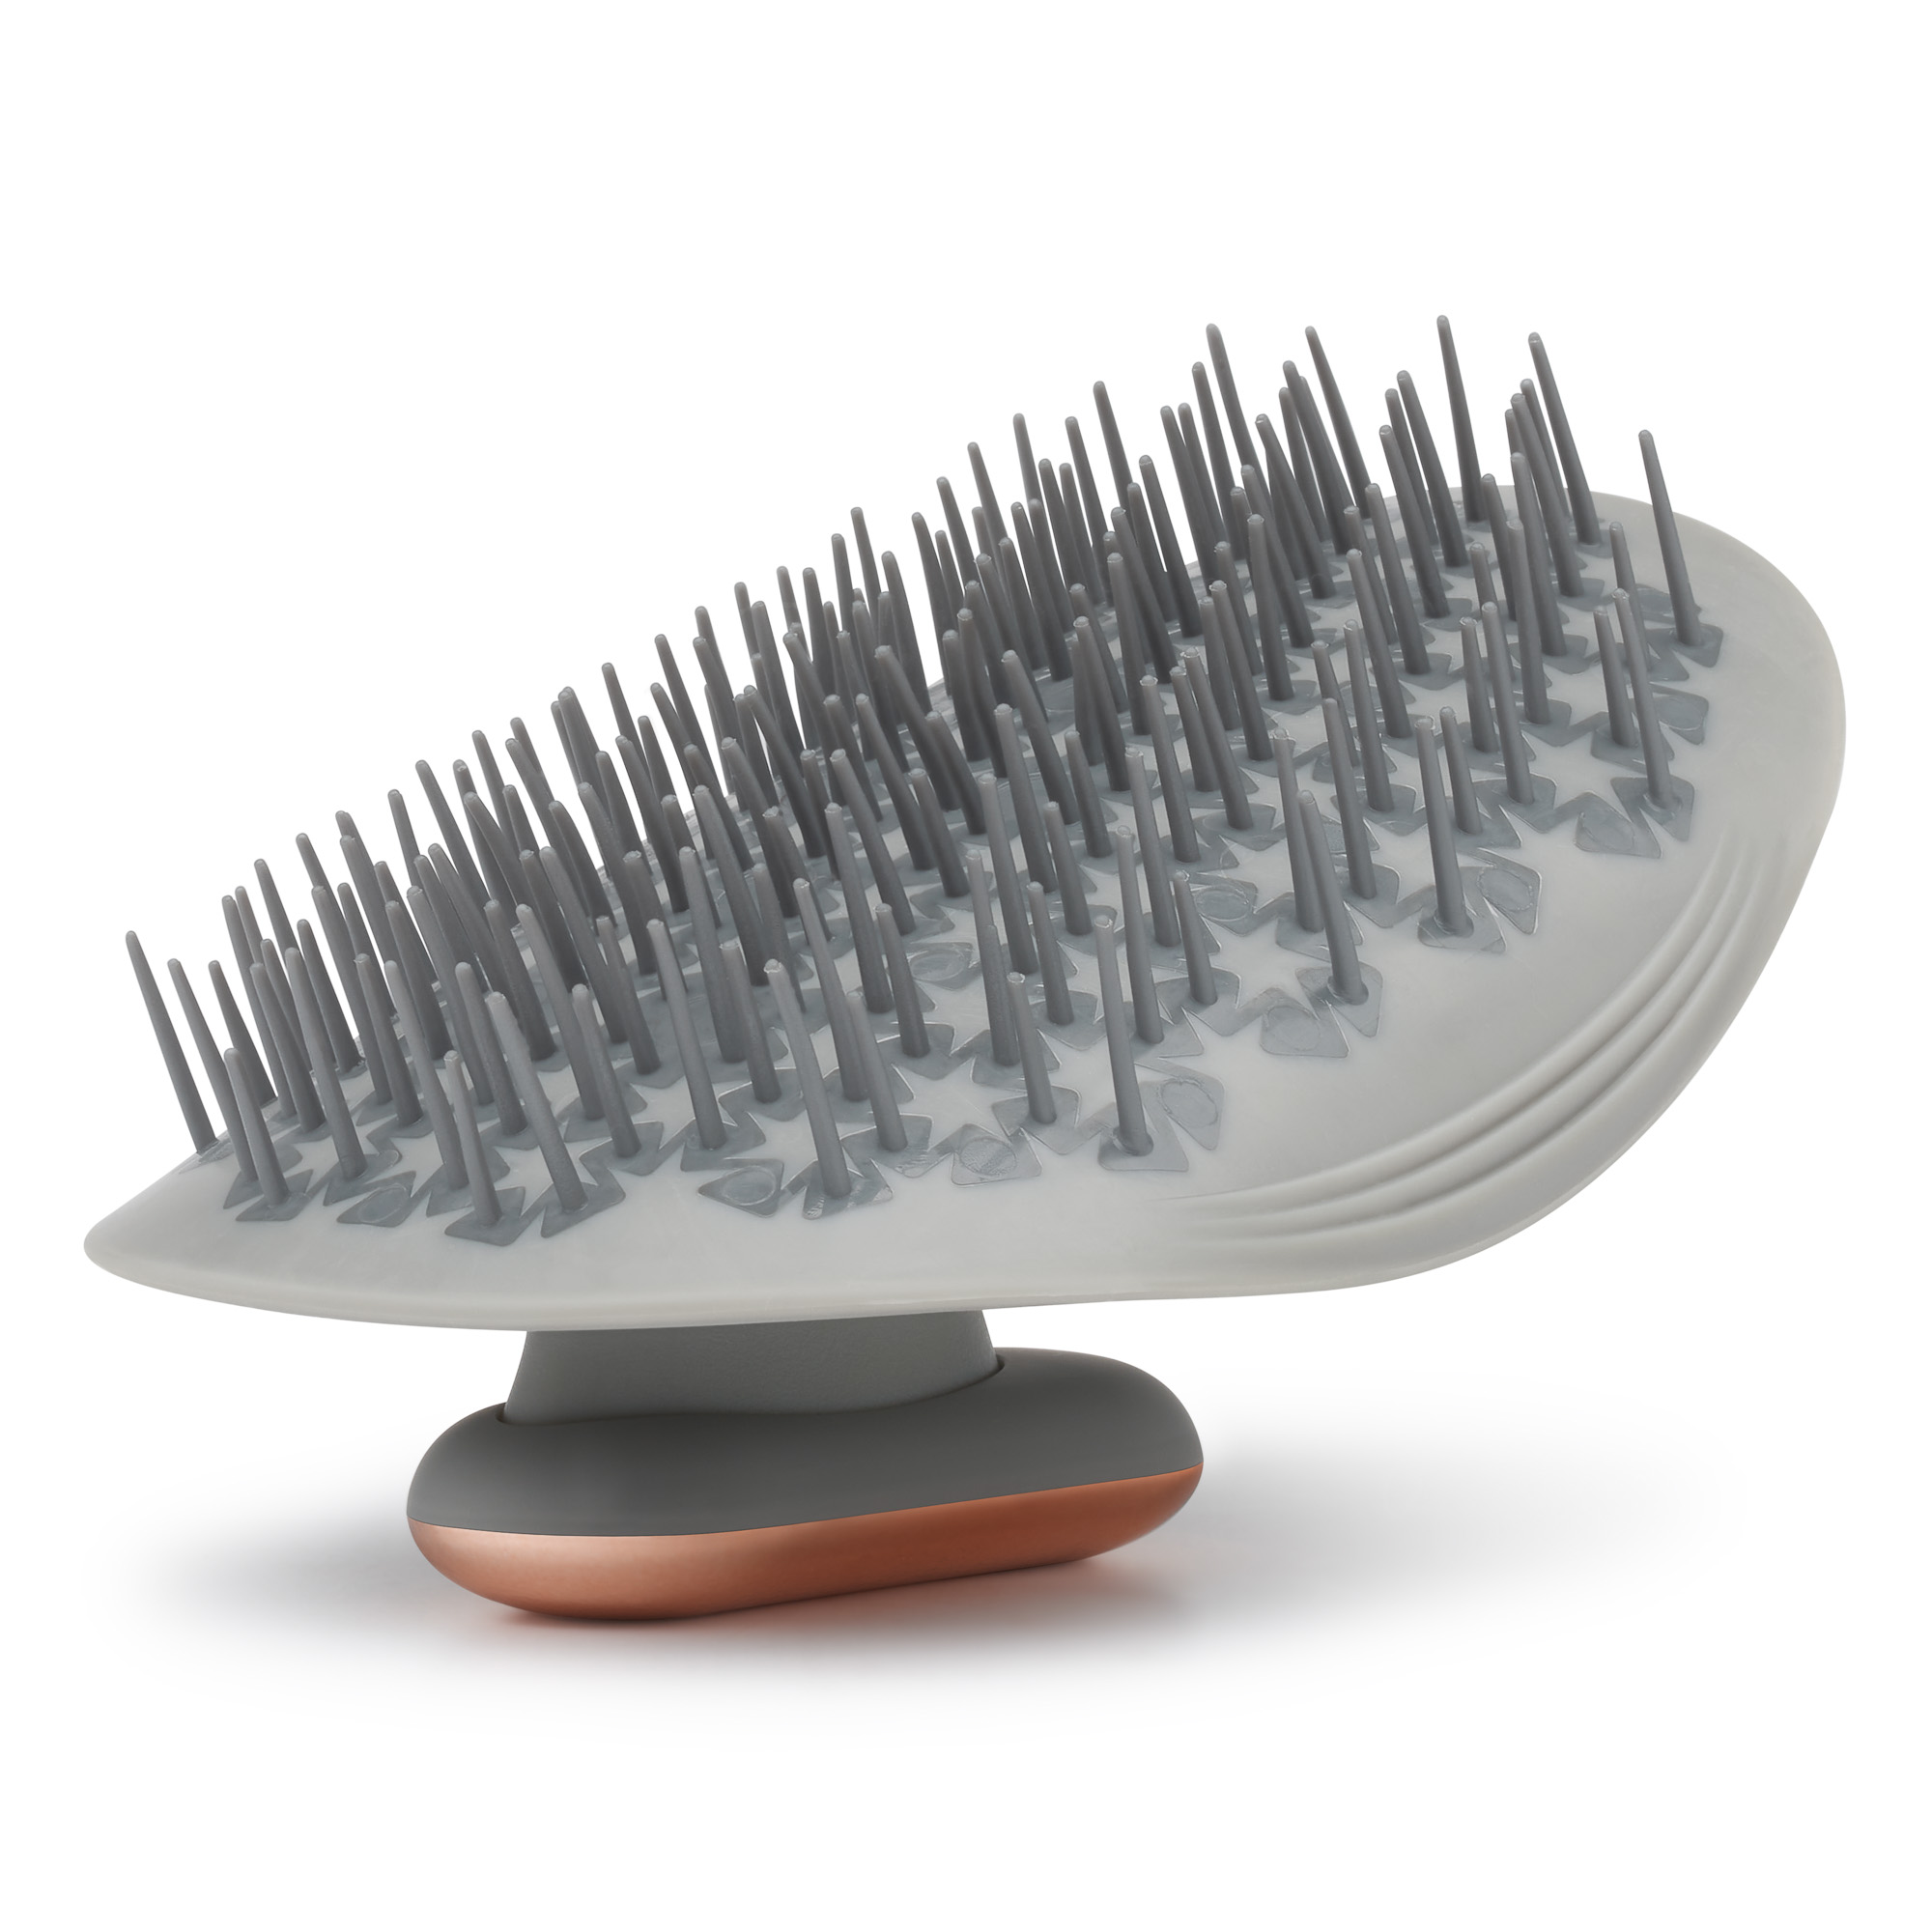 Manta Easy Hold Hair Brush with Magnetic Pulse Technology